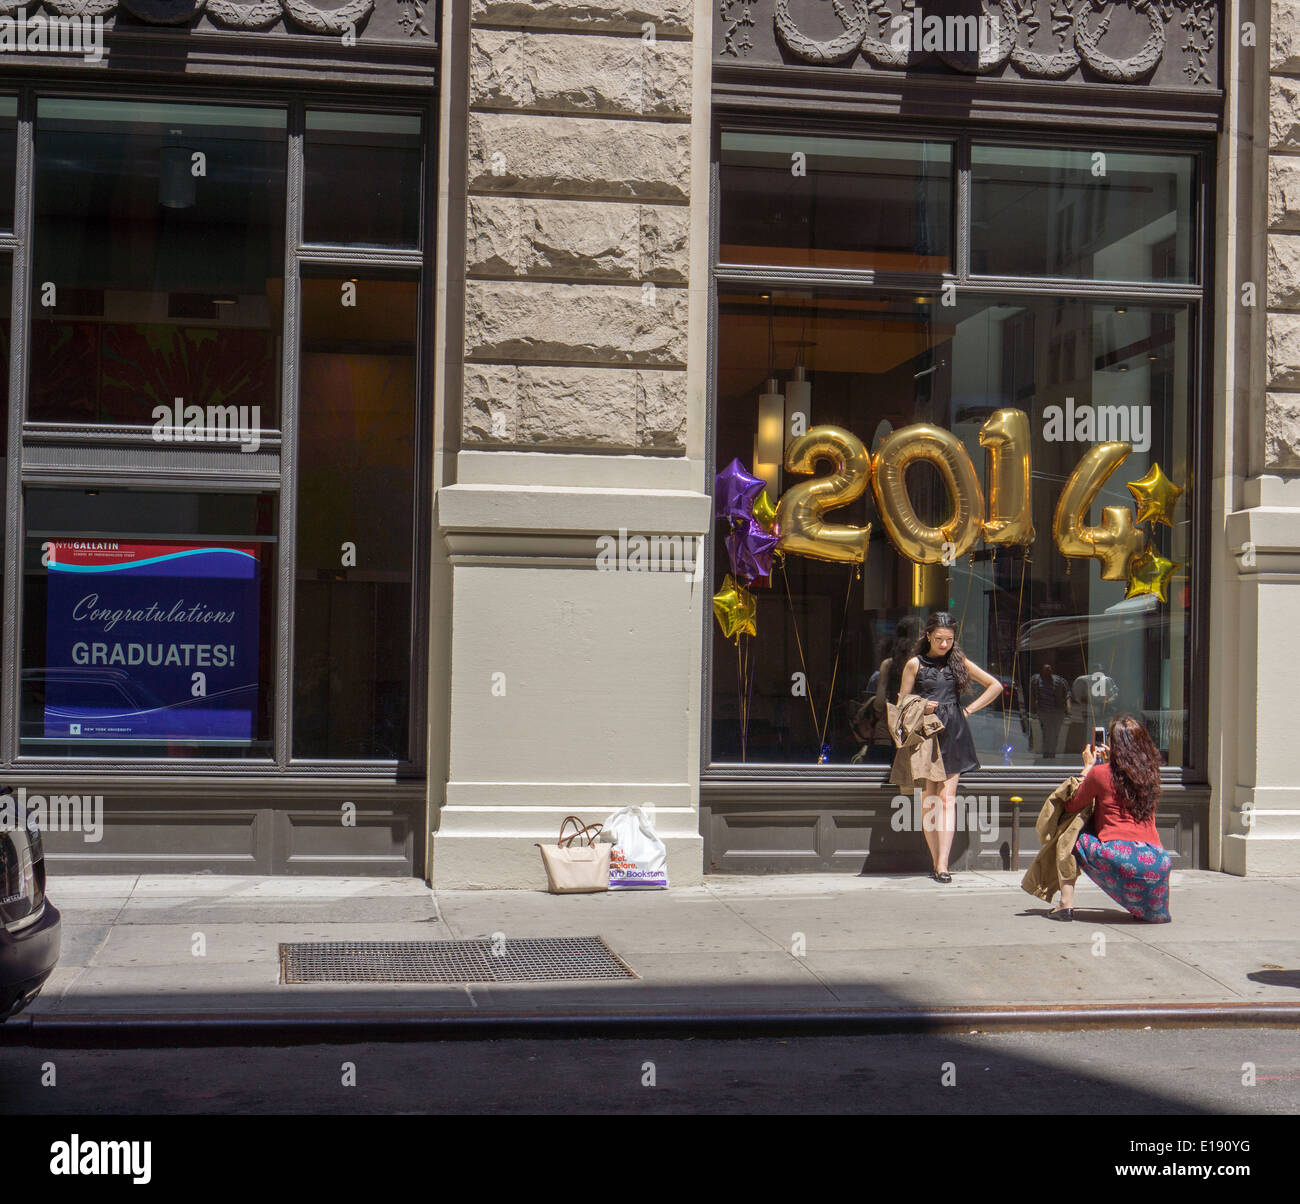 '2014' balloons on Tuesday, May 20, 2014 congratulate graduates of New York University in Greenwich Village in New York Stock Photo